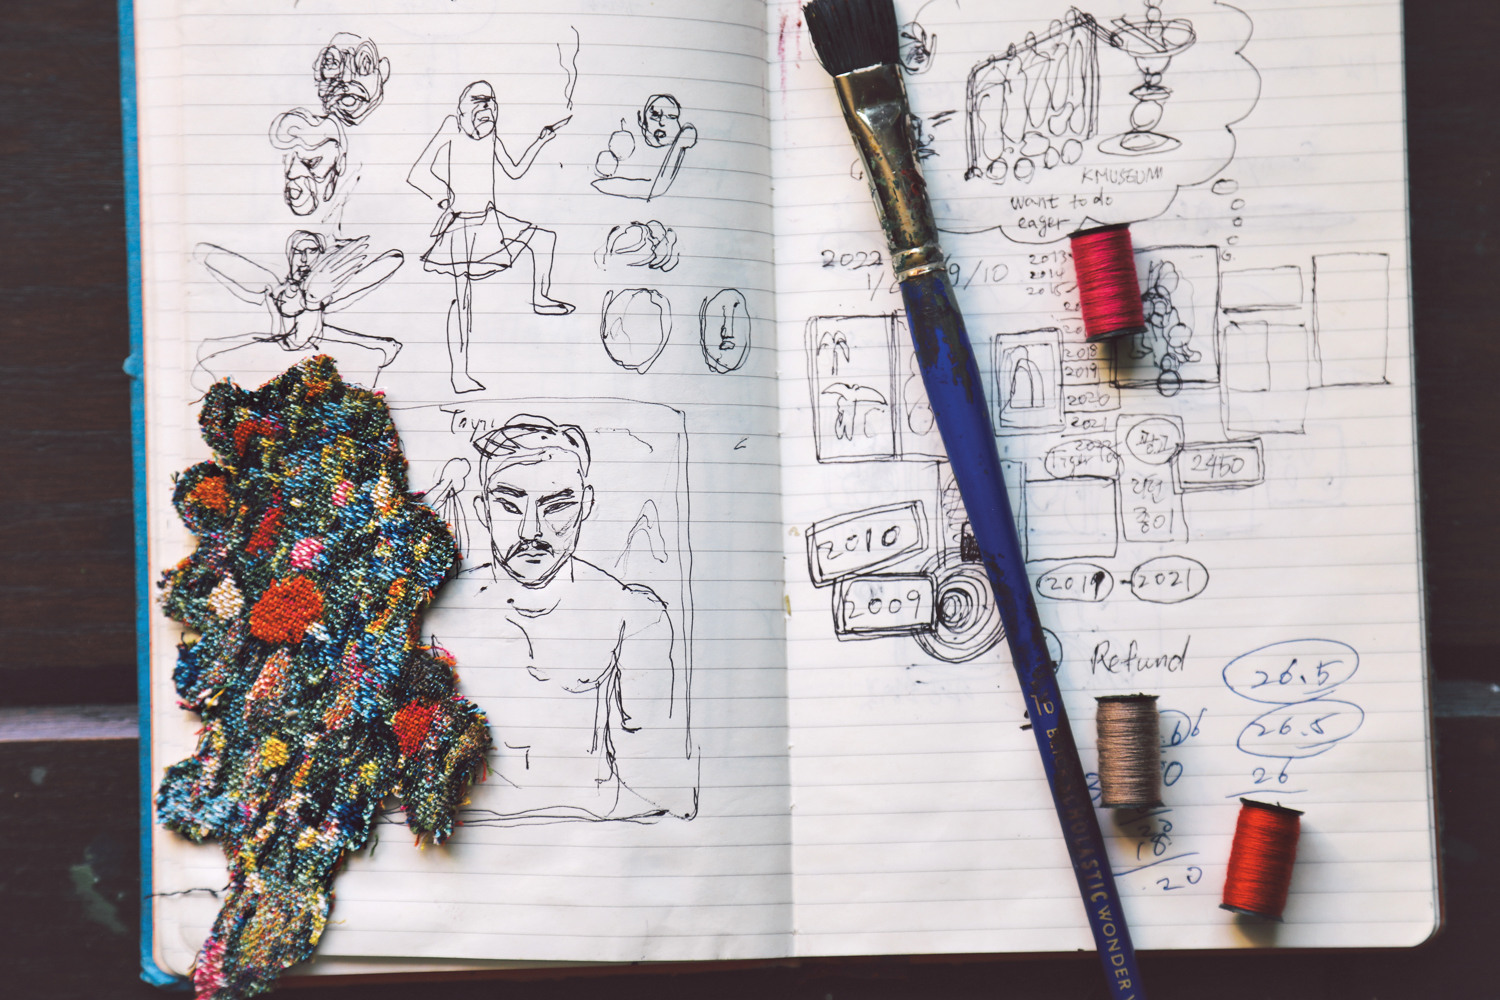 Pencil sketches in a notebook, with a patch of embroidery, a paintbrush and thread spools on the pages.